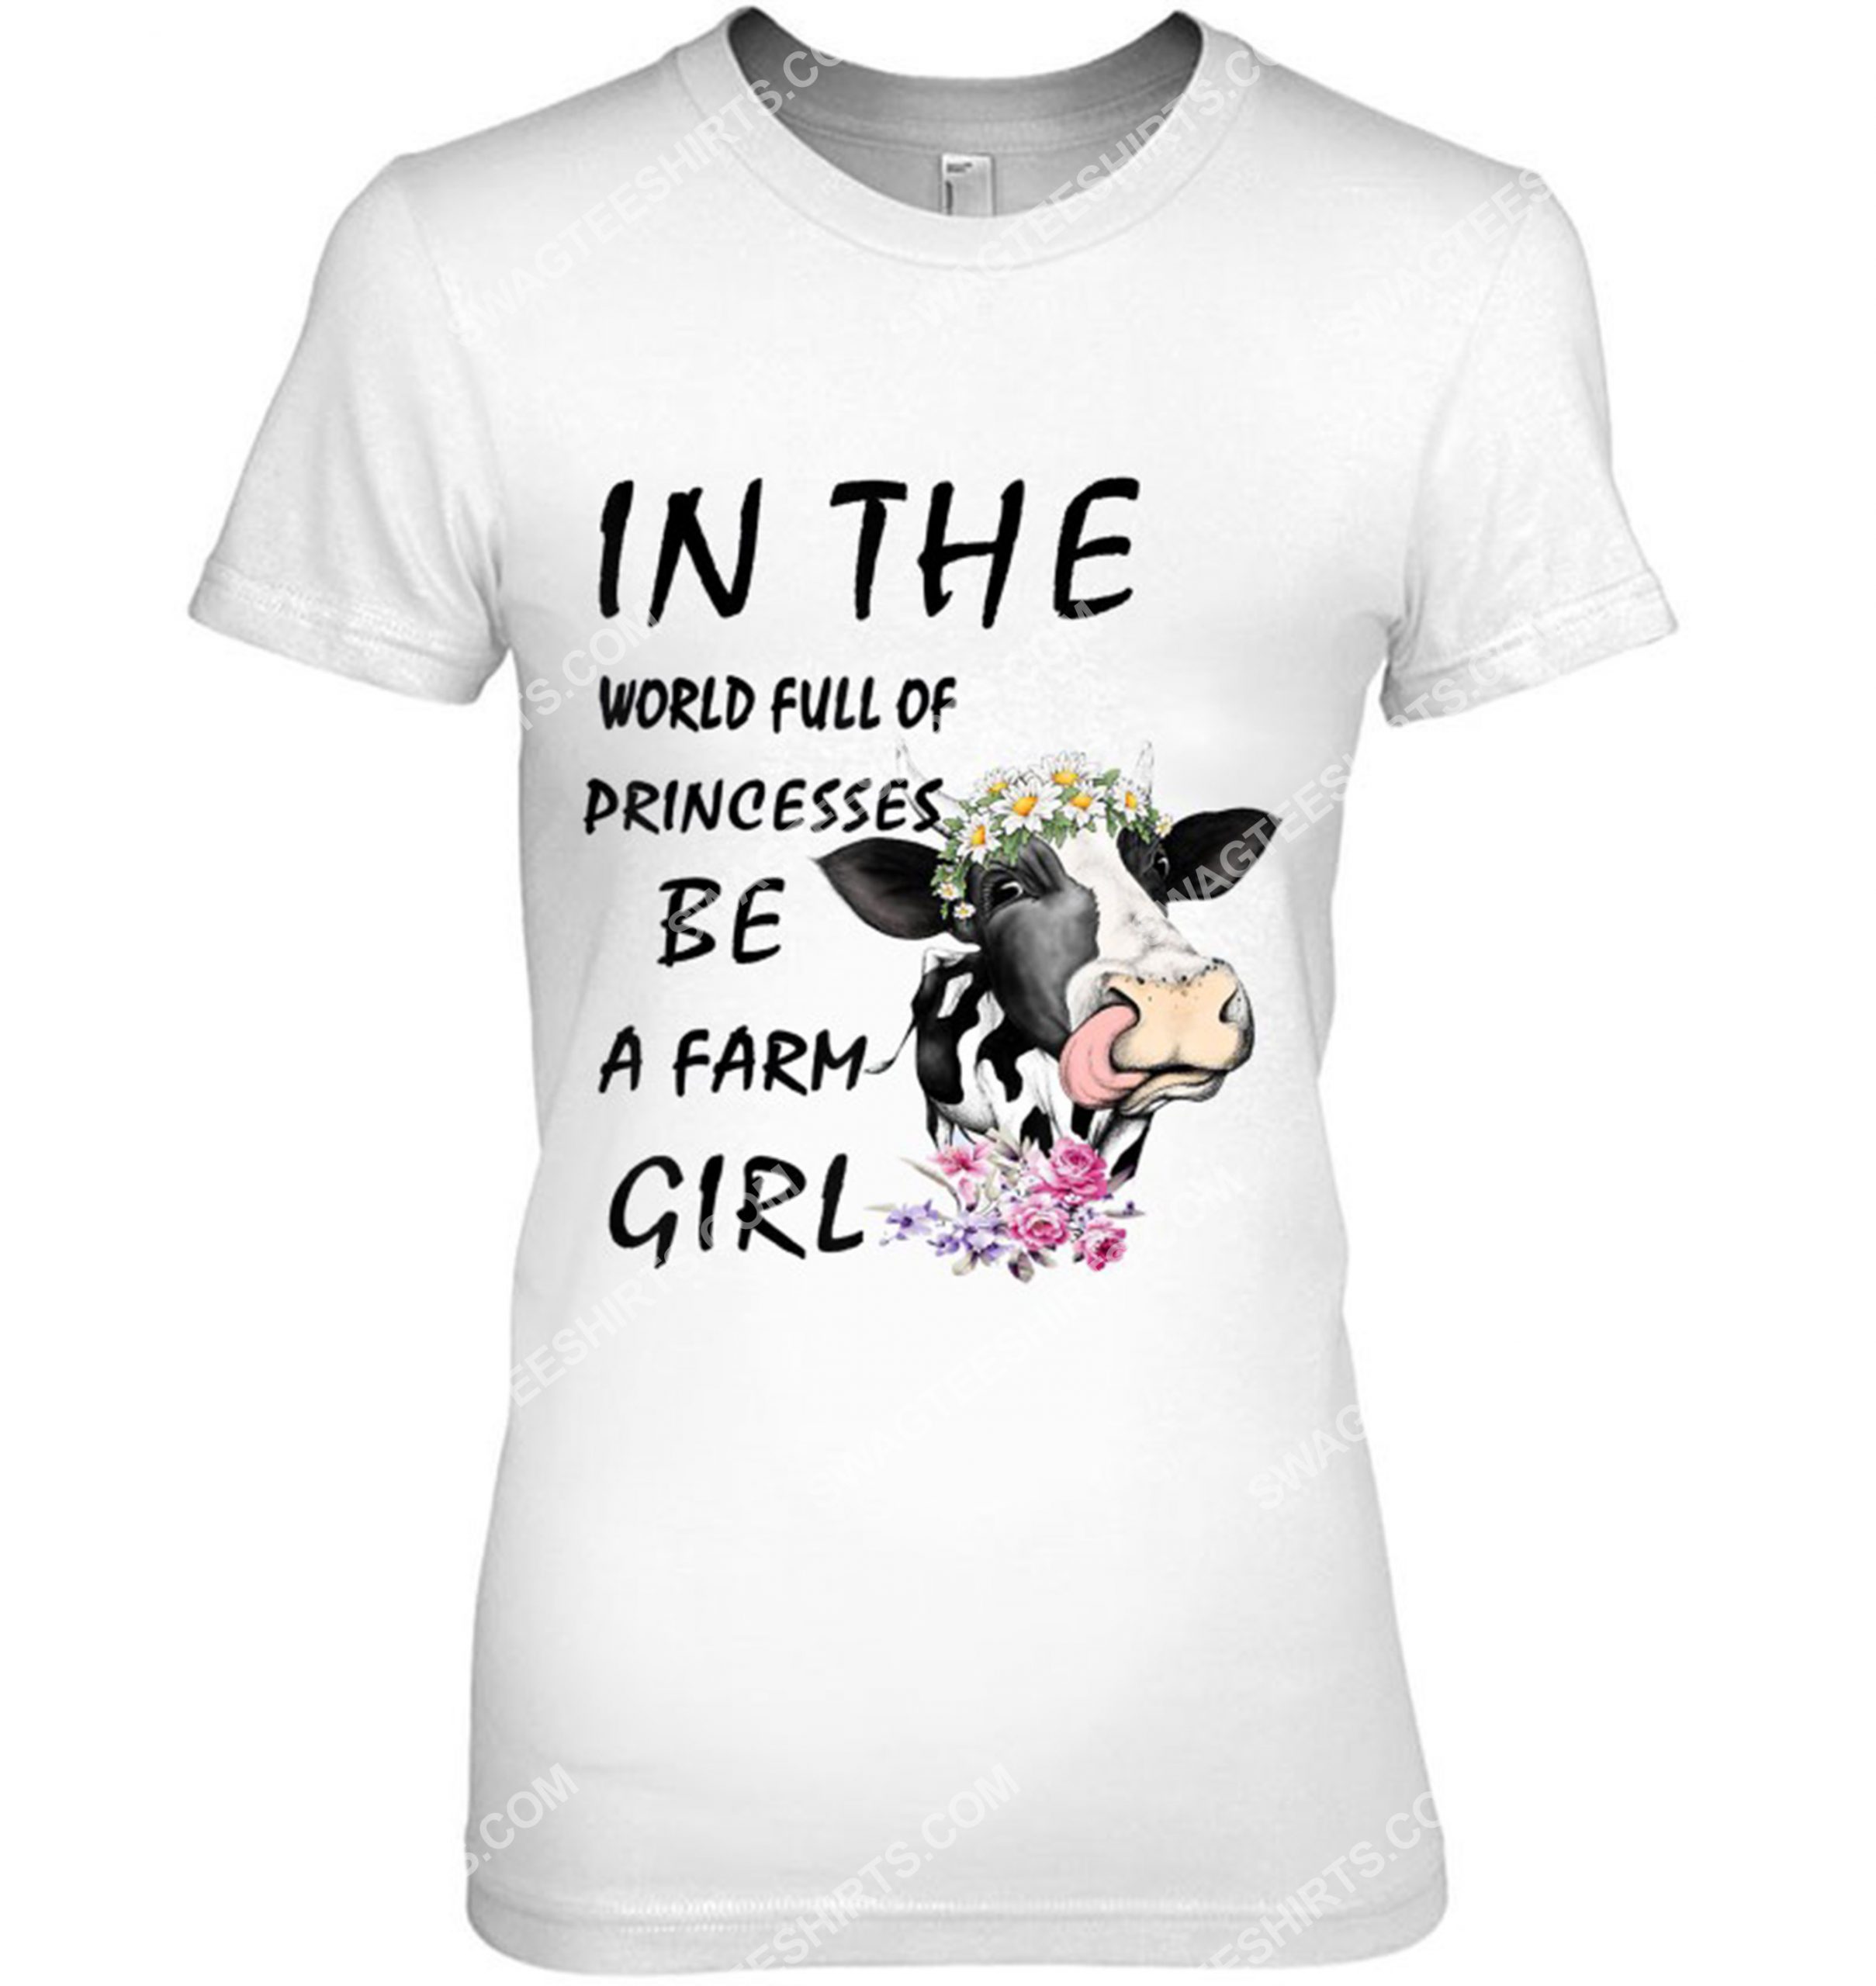 in the world full of princesses be a farm girl cow shirt 1(1)